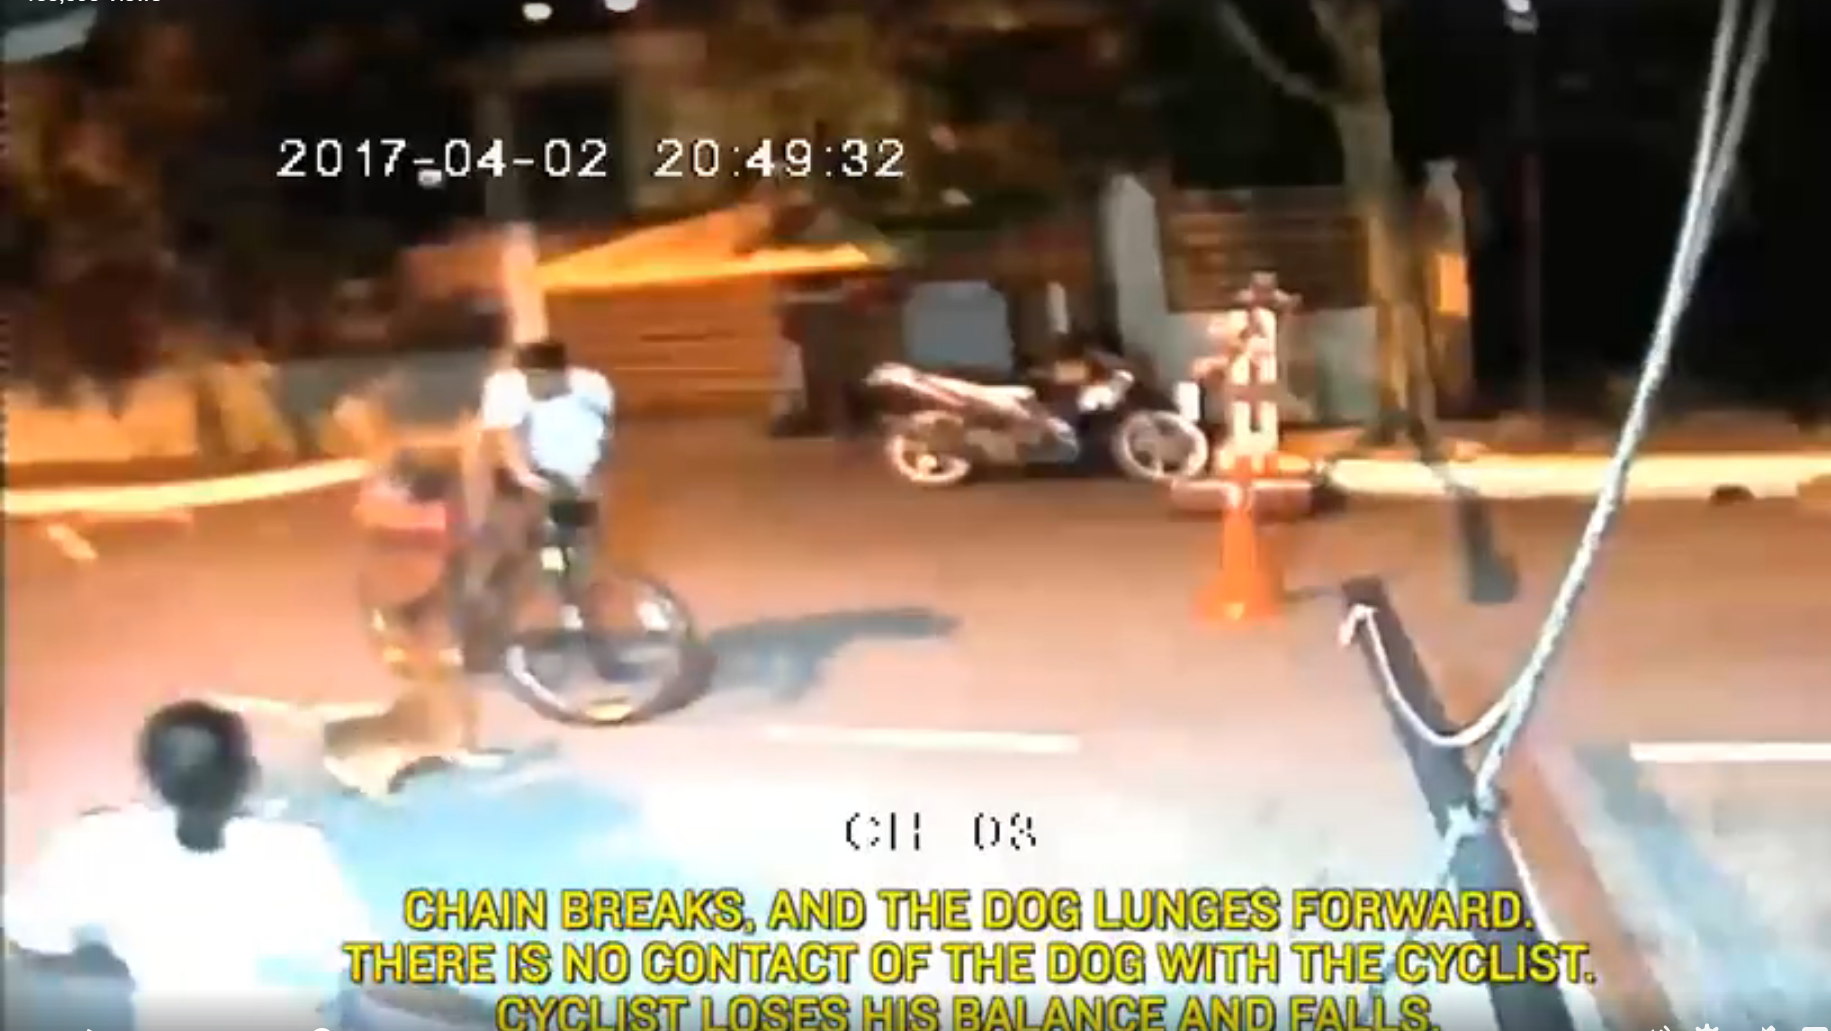 Uncivilized Man Brutally Hit Guard Dog With Helmet - World Of Buzz 1